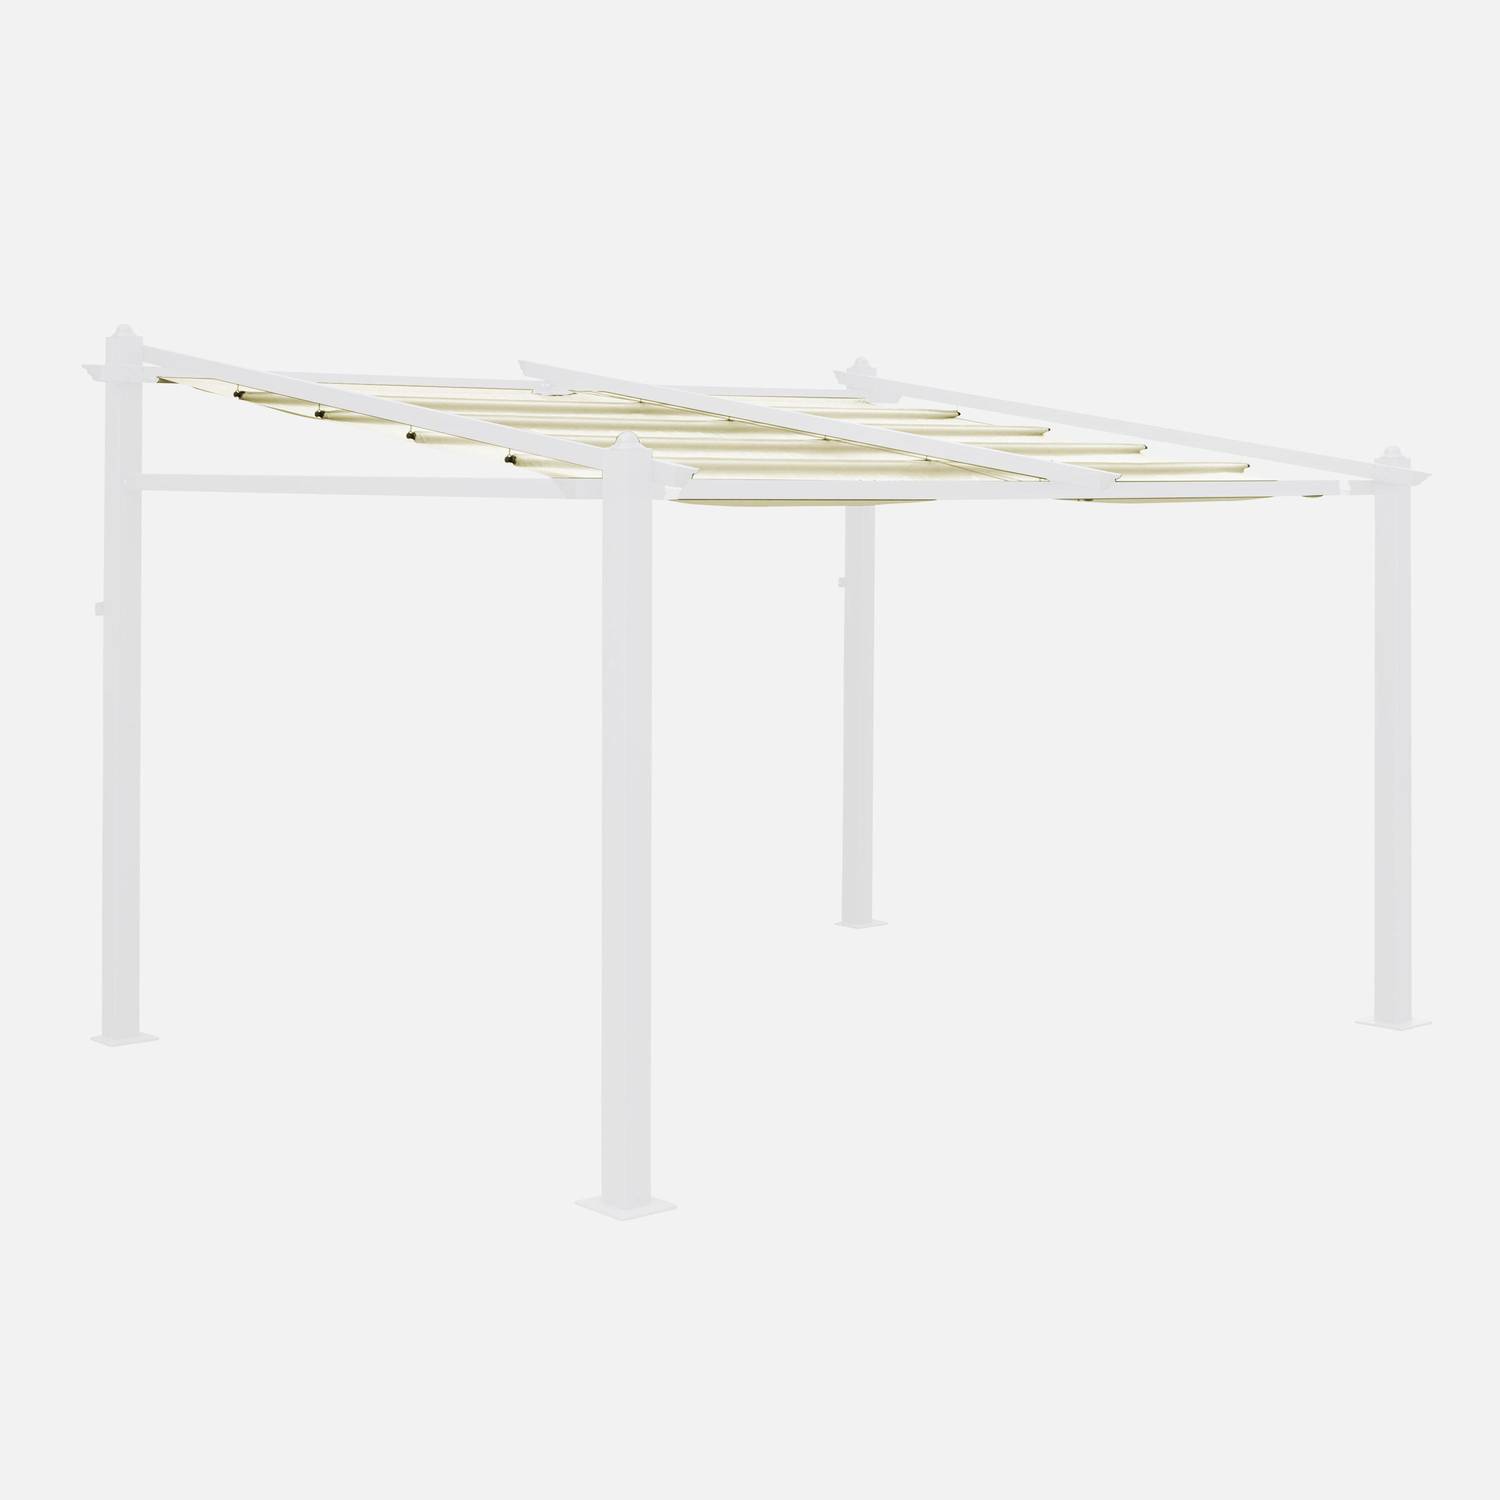 Canopy roof for 3x4m Morum gazebo - pergola replacement canopy - Off-White Photo1